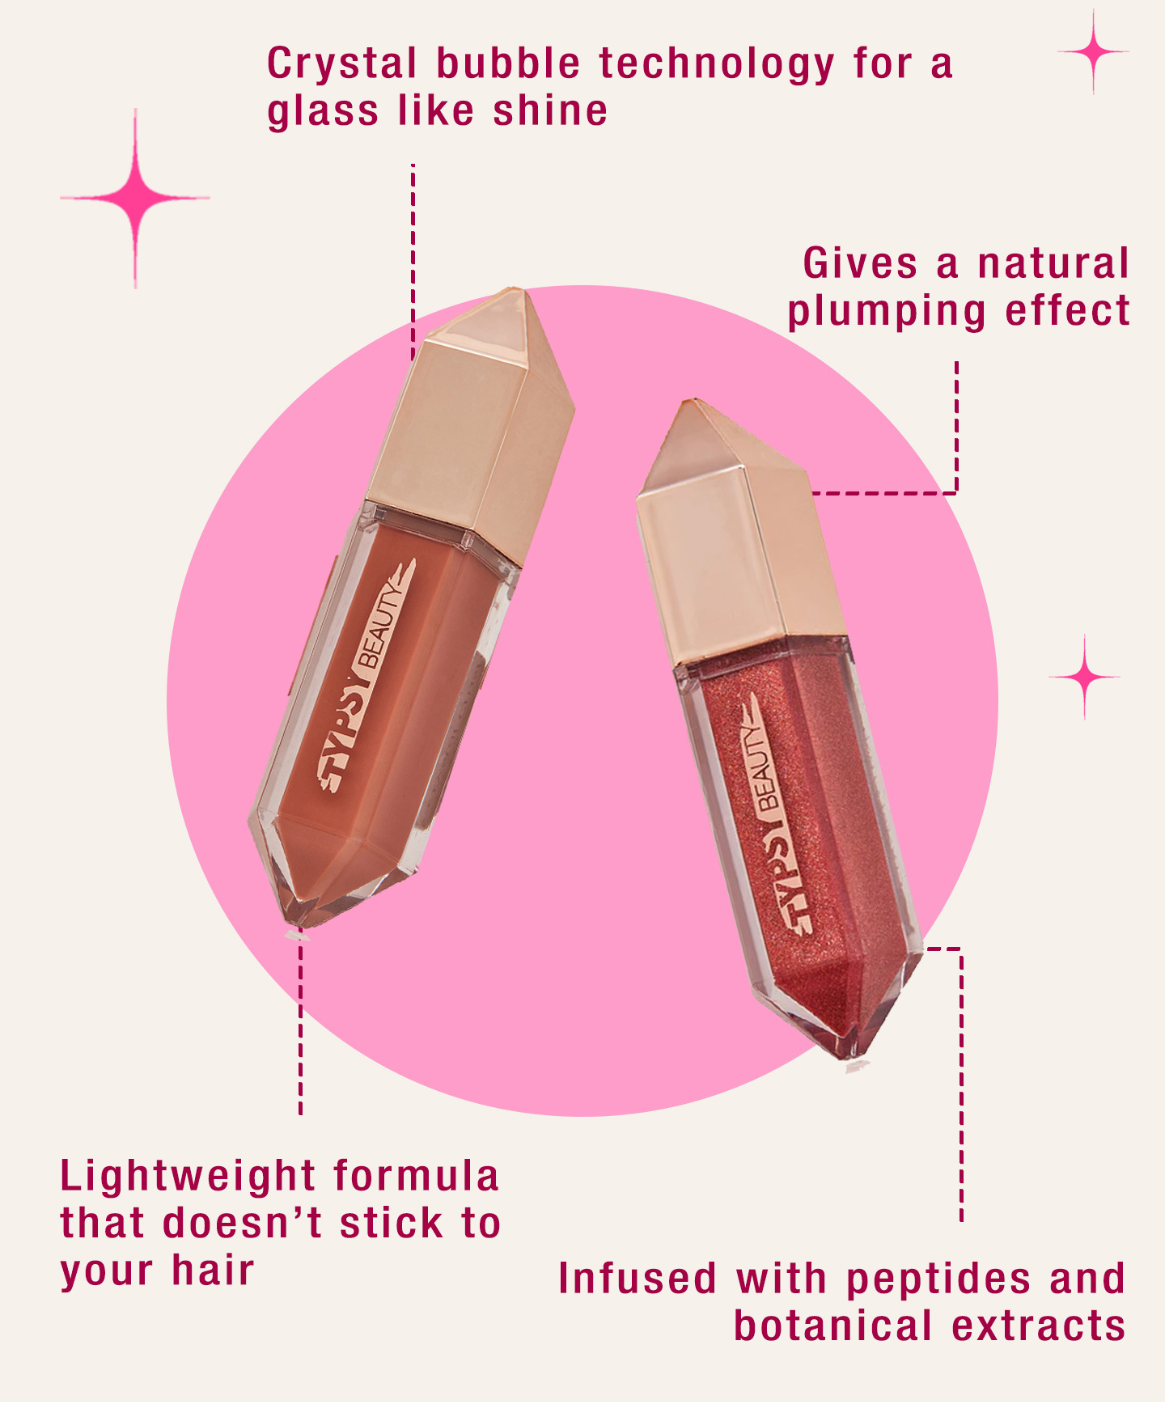 Typsy Beauty Plumping Lip Gloss: Lip plumping without injections, crystal bubble technology for shine, infused with peptides and botanical extracts for hydration.